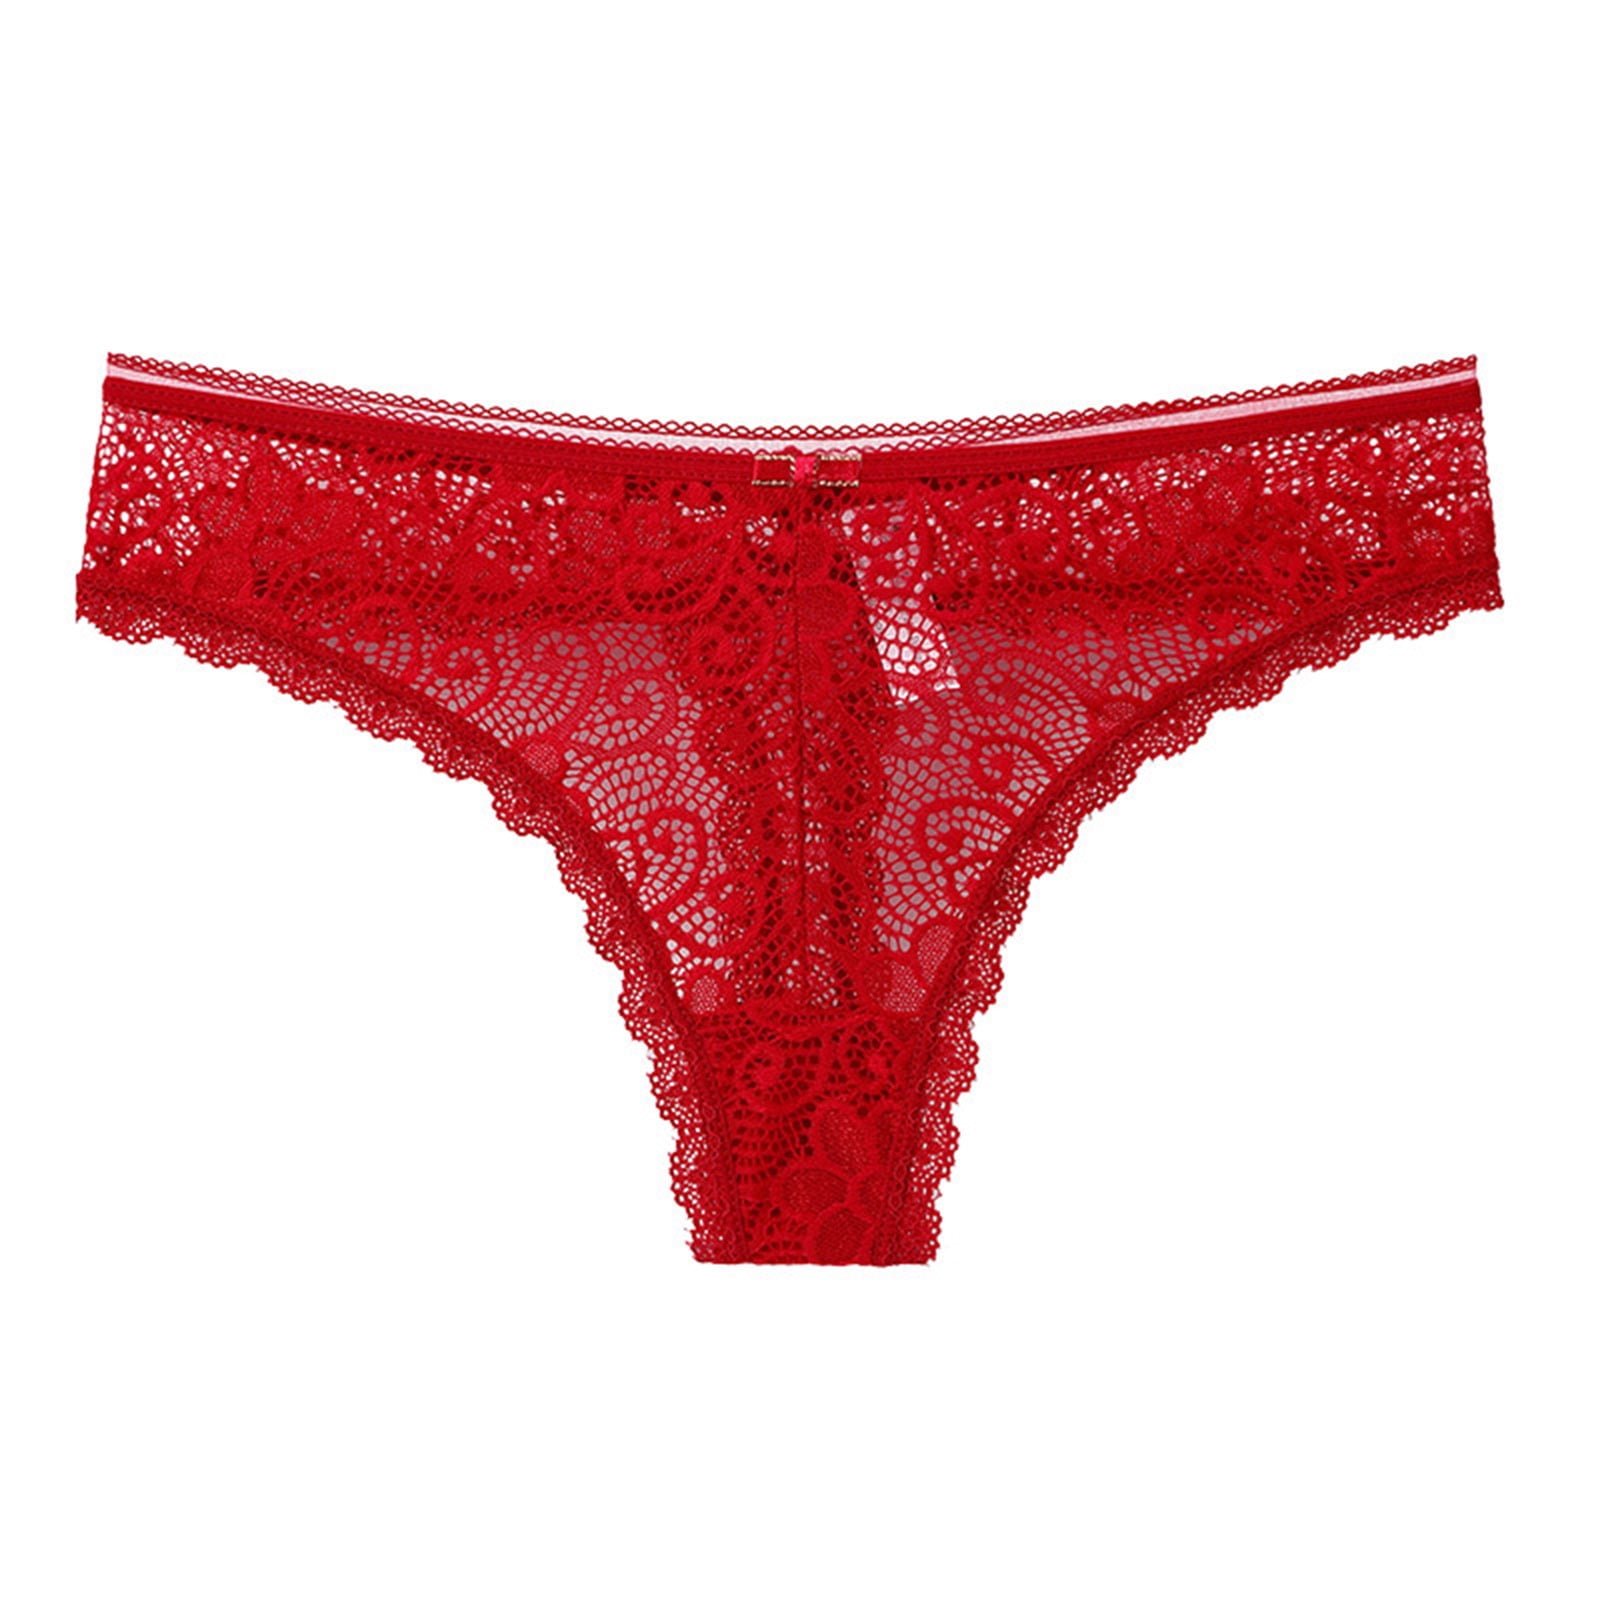 Pxiakgy intimates for women Panty Lace Tback Gstring Lingerie Mesh Men's  Thong Pouch Brief Red + One size